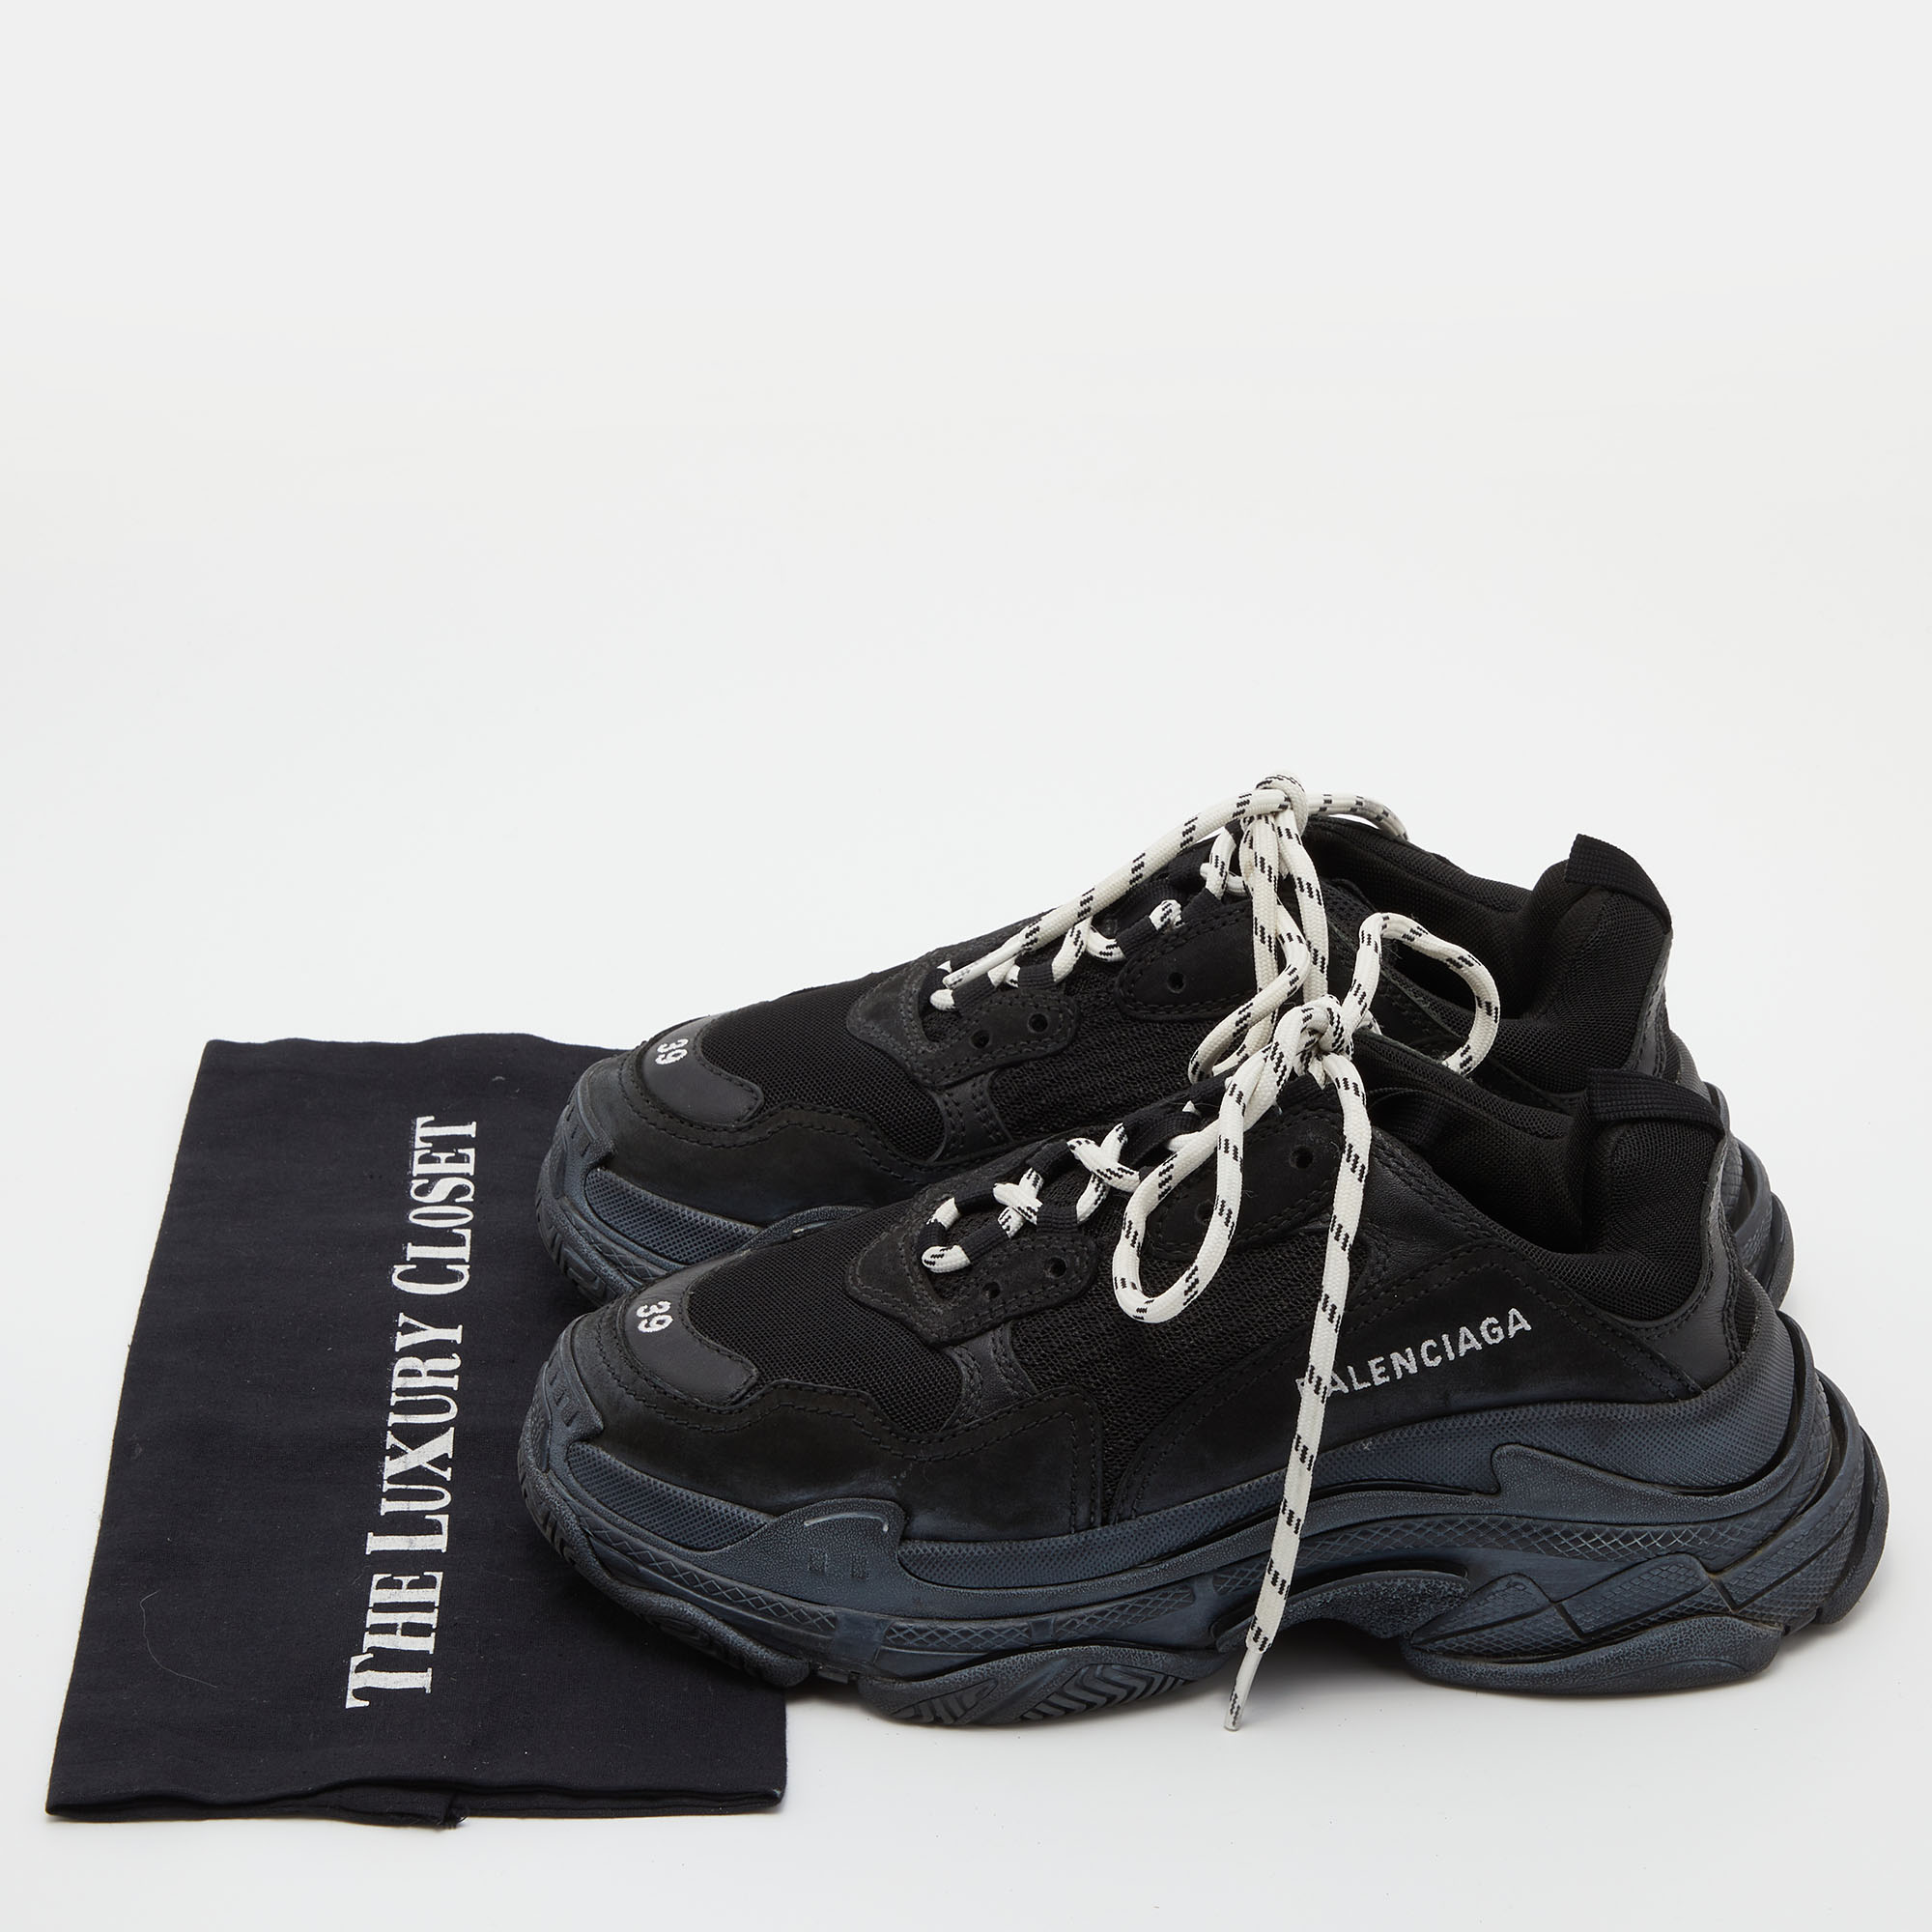 Balenciaga Black Mesh And Leather Triple S Sneakers Size 39